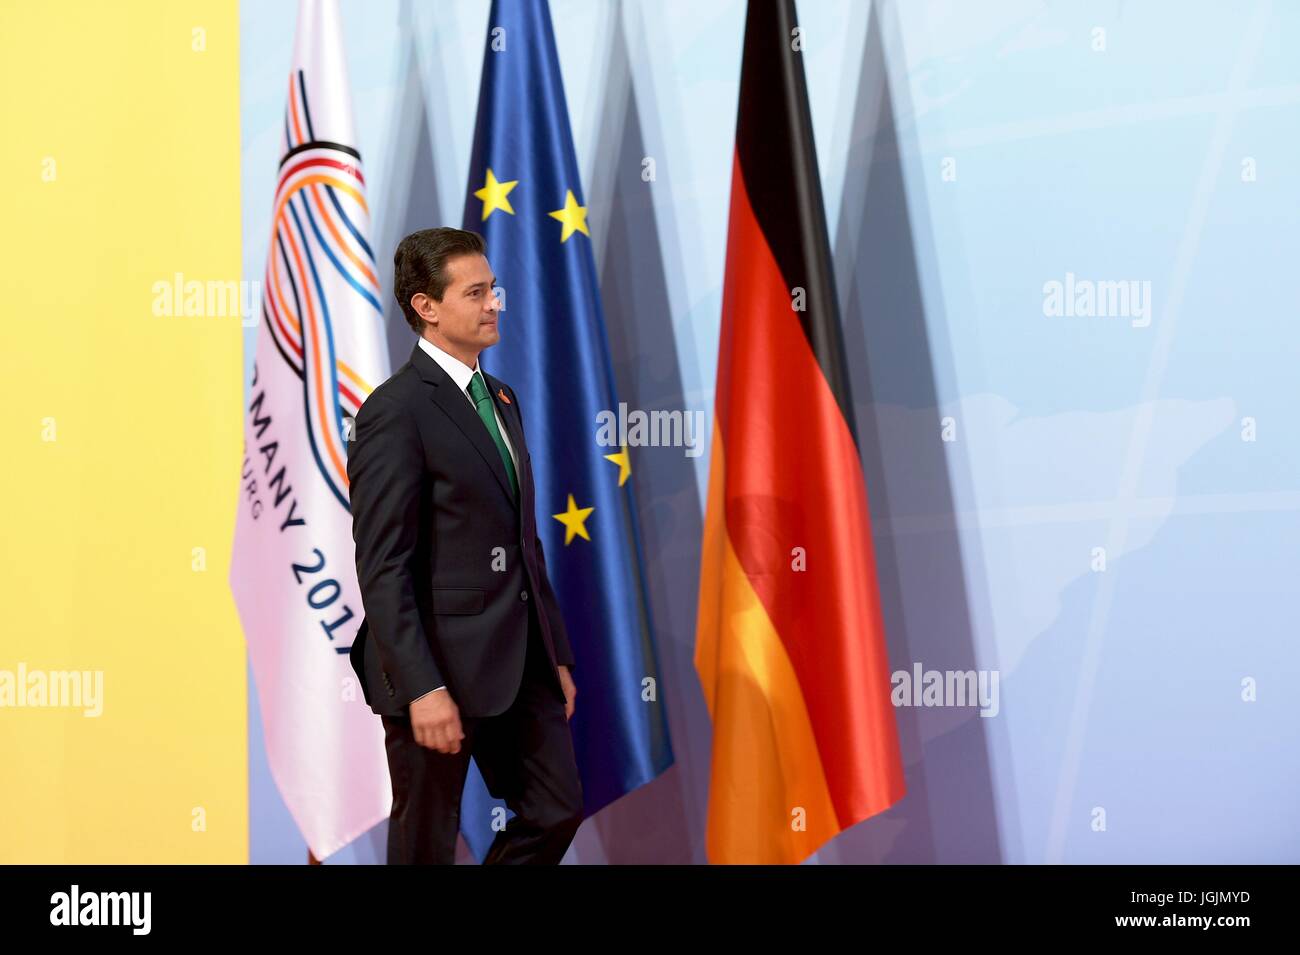 Hamburg, Germany. 07th July, 2017. Mexican President Enrique Pena Nieto arrives at the start of the first day of the G20 Summit meeting July 7, 2017 in Hamburg, Germany. Credit: Planetpix/Alamy Live News Stock Photo